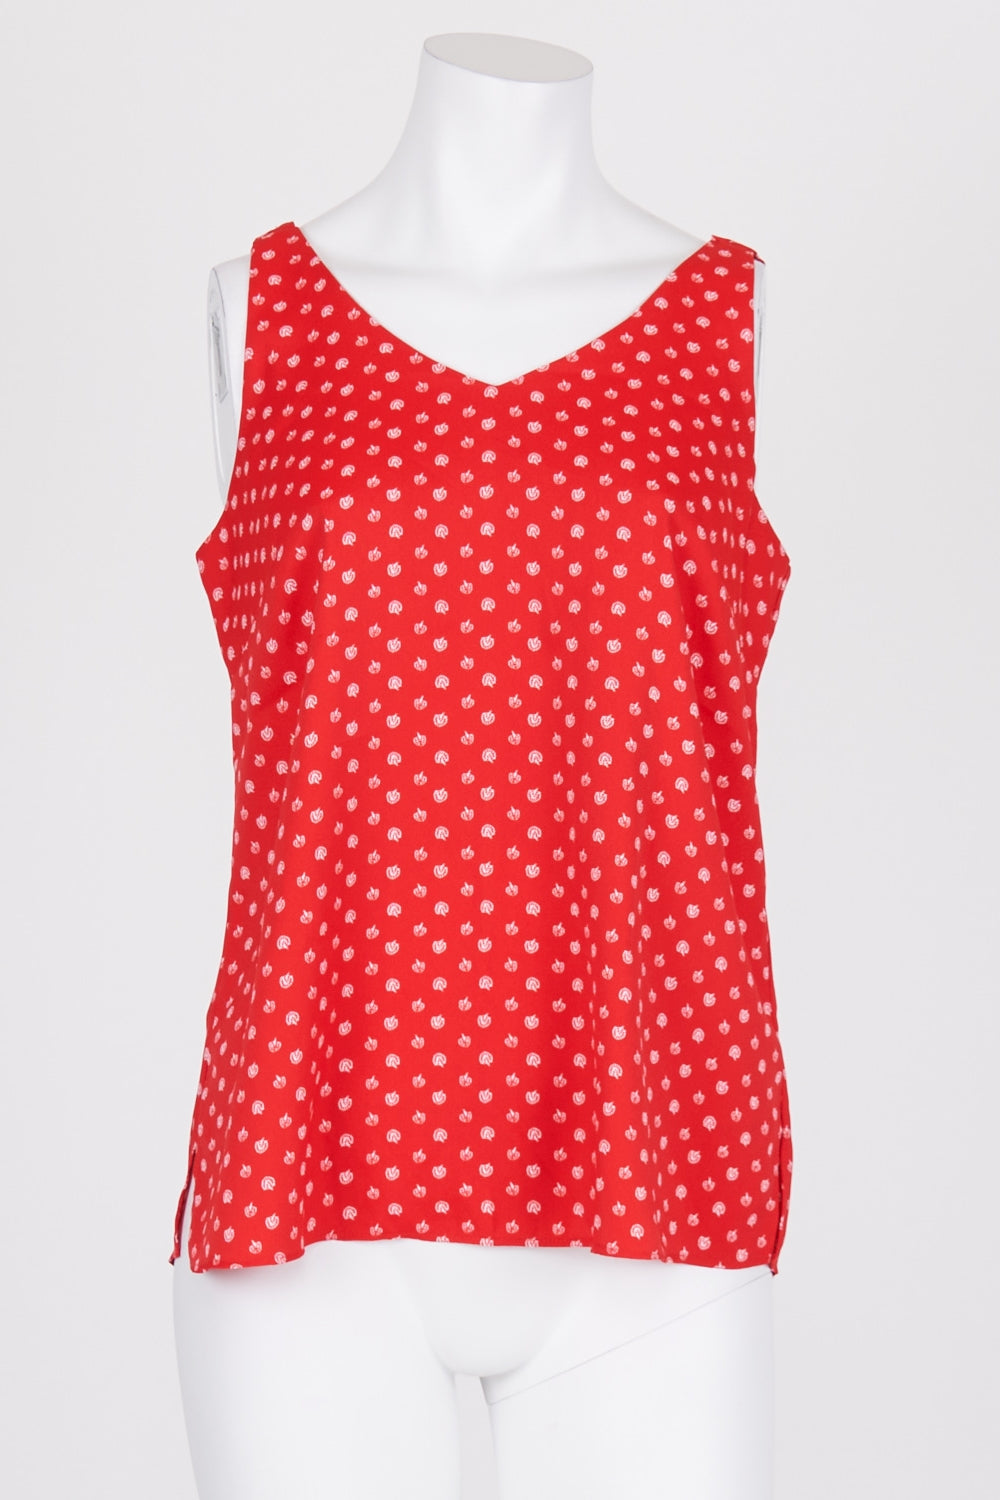 Basque Red Patterned Sleeveless Top 8